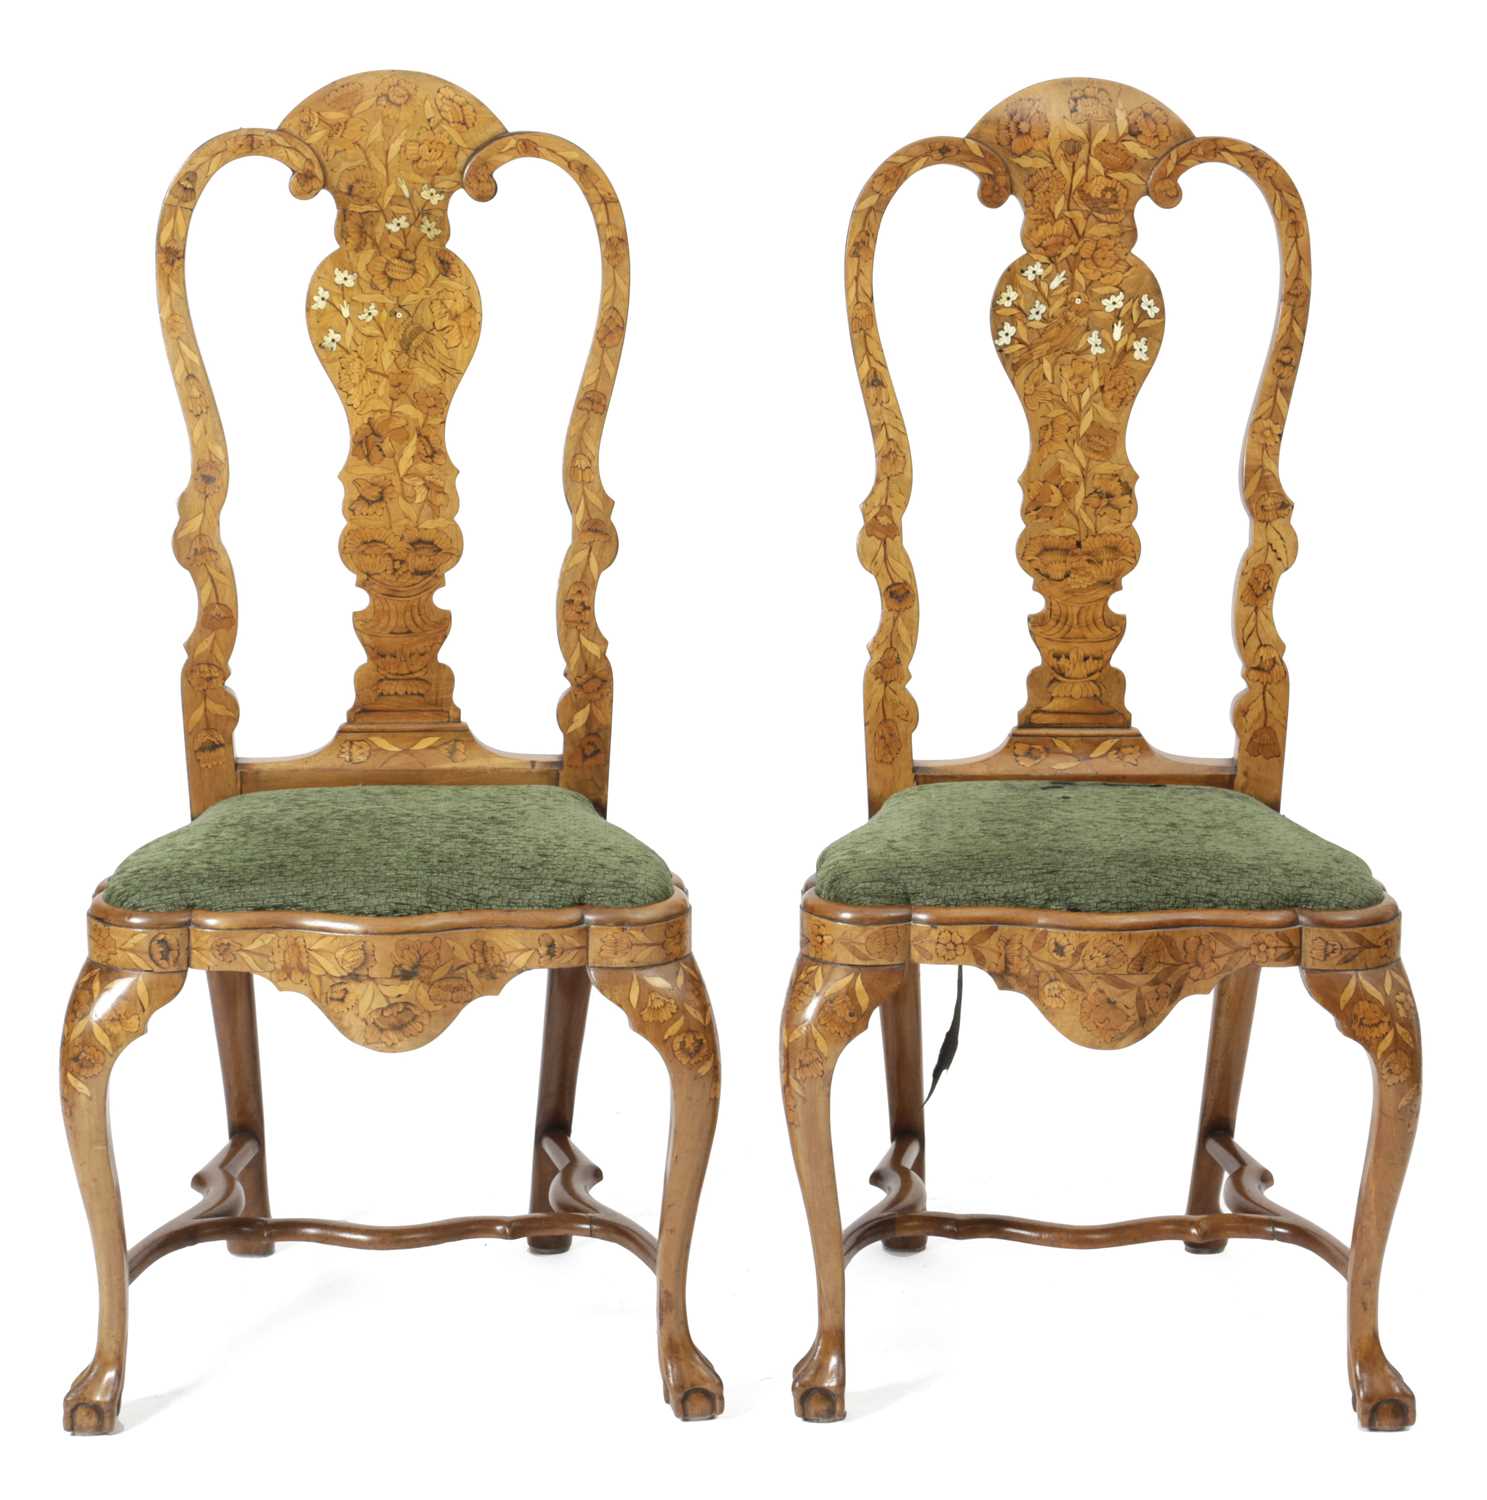 A PAIR OF DUTCH WALNUT AND MARQUETRY SIDE CHAIRS LATE 18TH CENTURY each with an arched back with a